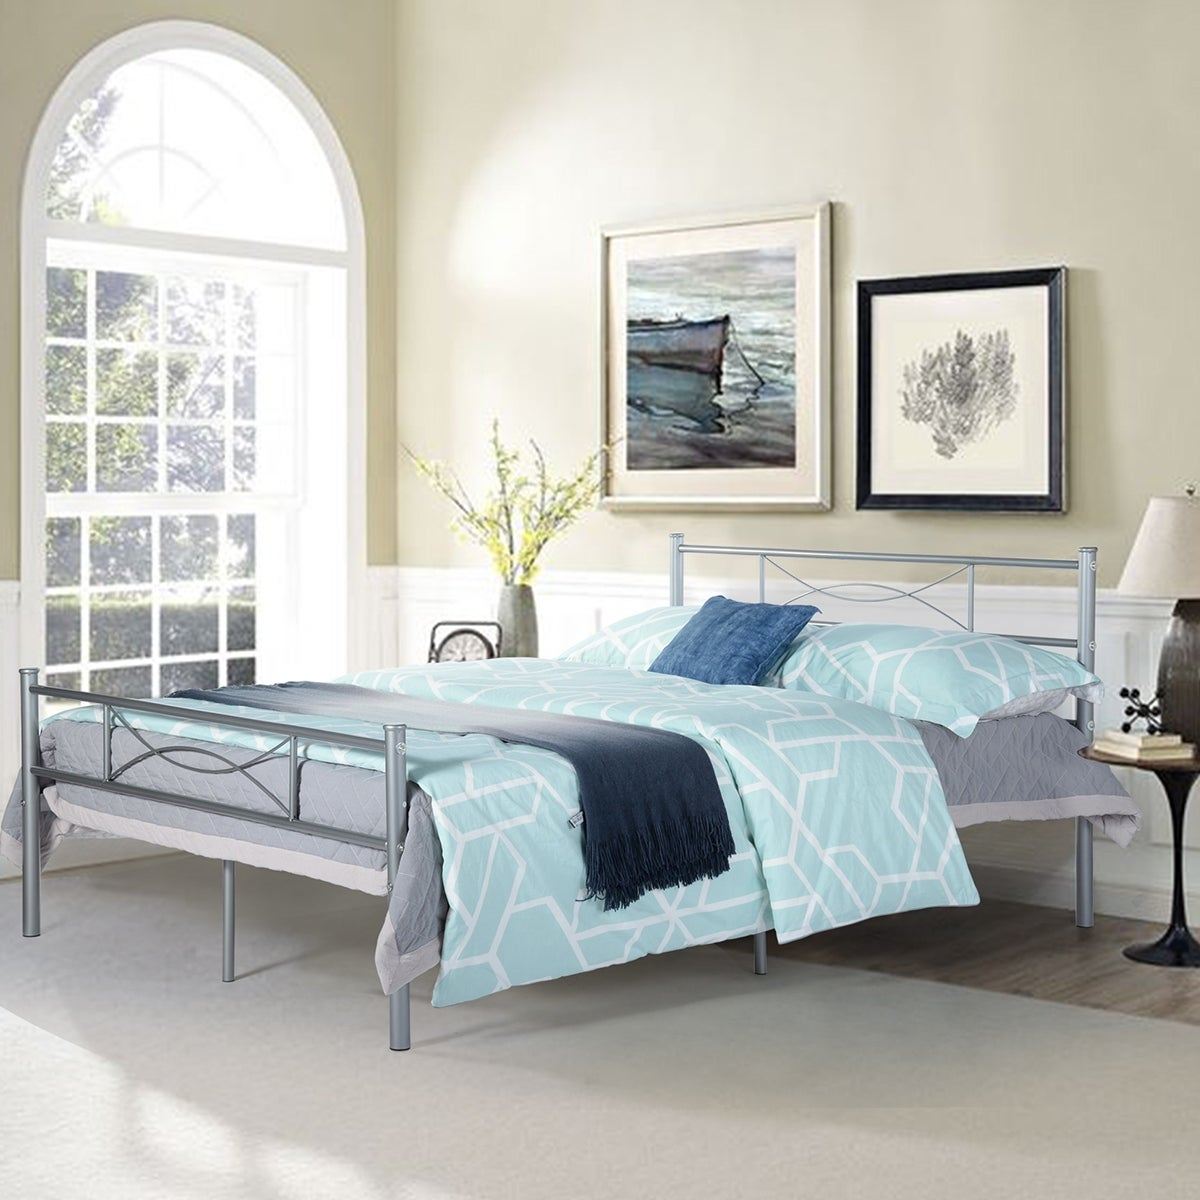 Easy Set Up Full Metal Bed Frame Bedroom Furniture With Headboard Silver in measurements 1200 X 1200